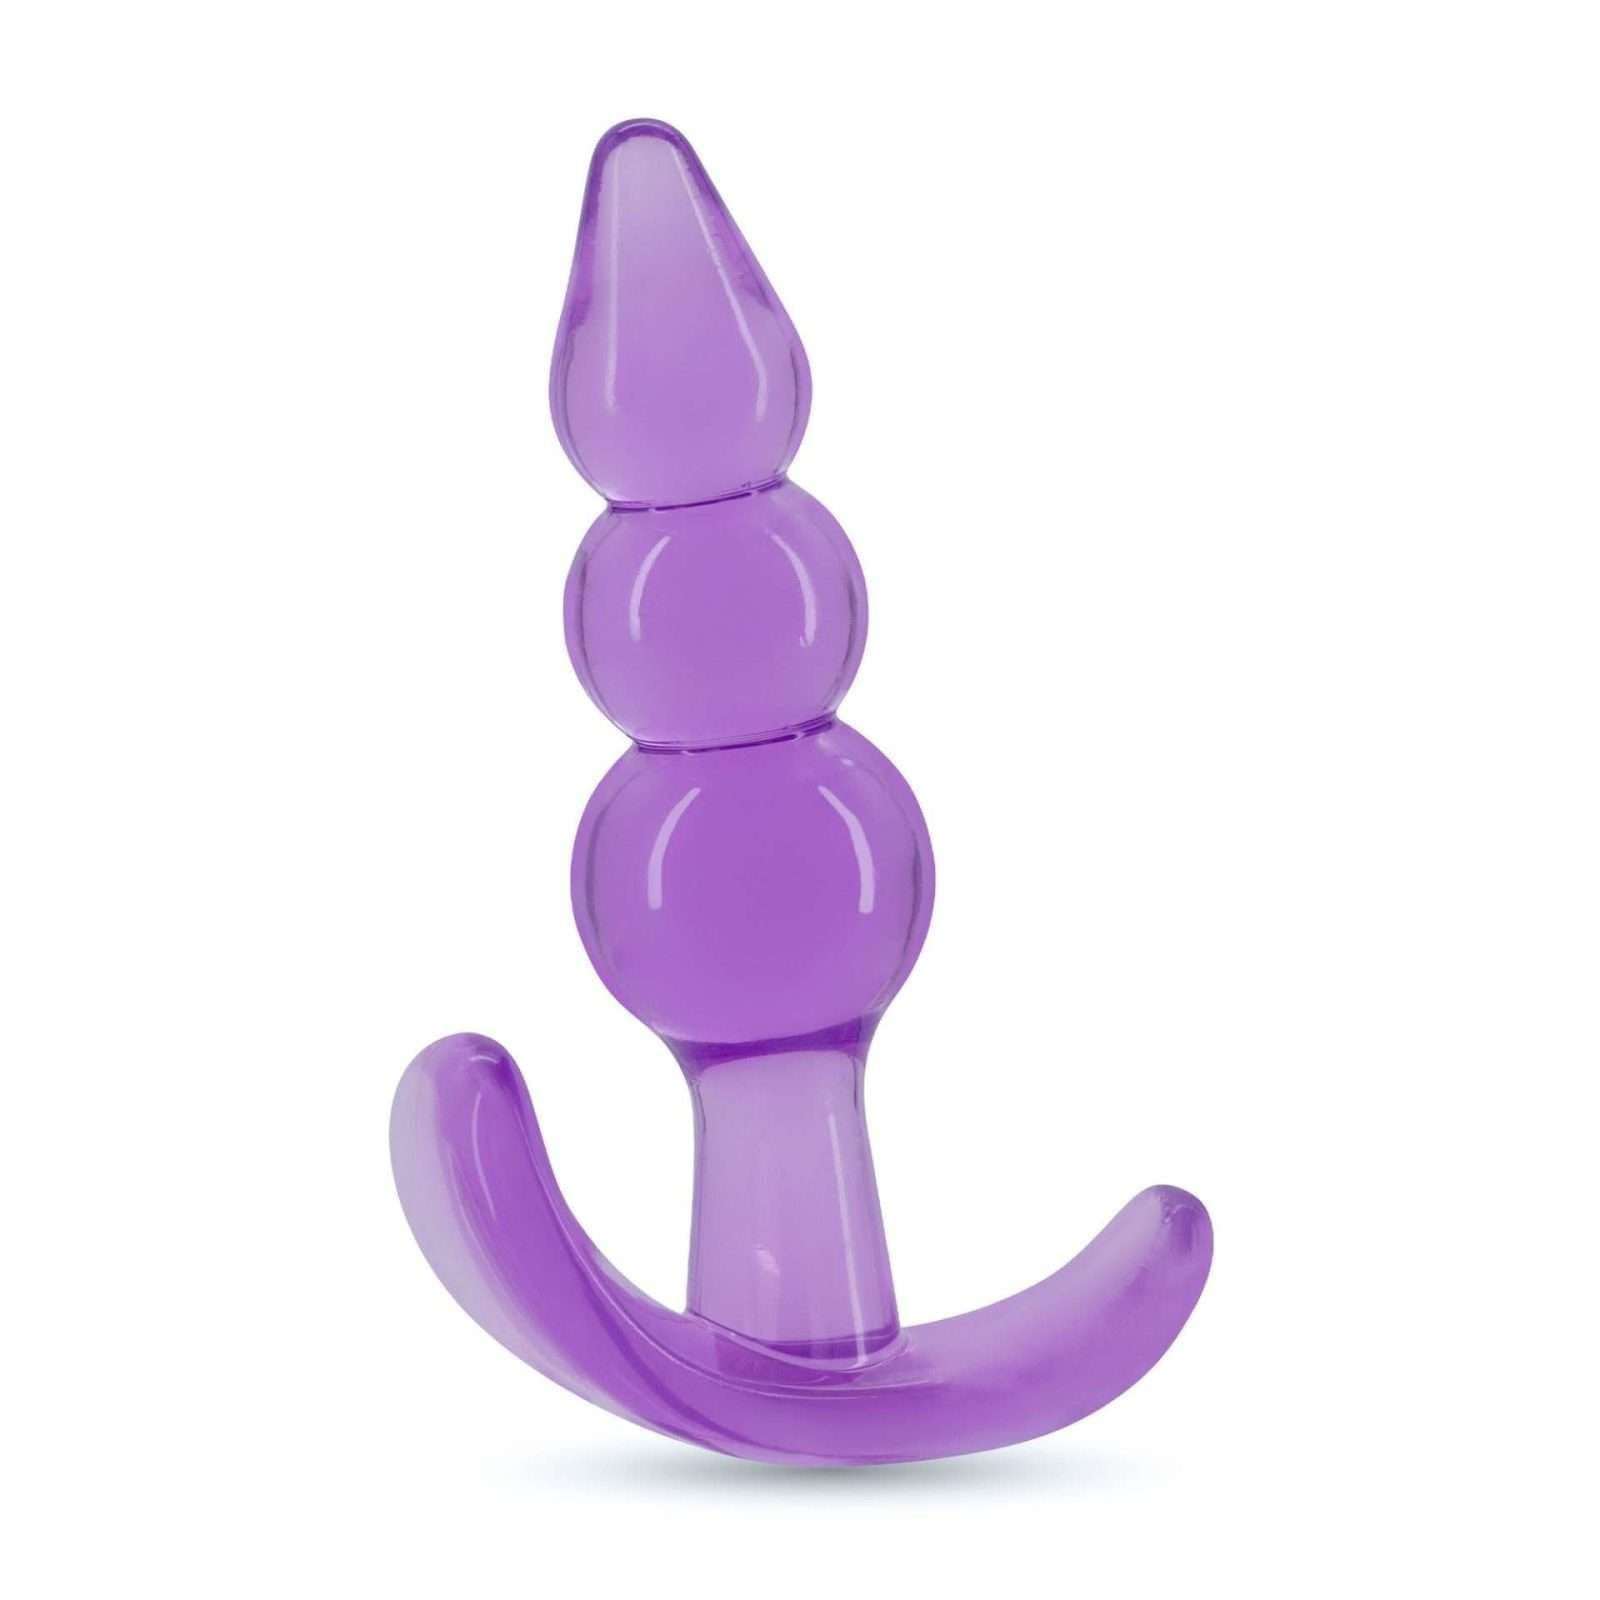 CRUSHIOUS THE PLUNGER ANAL PLUG